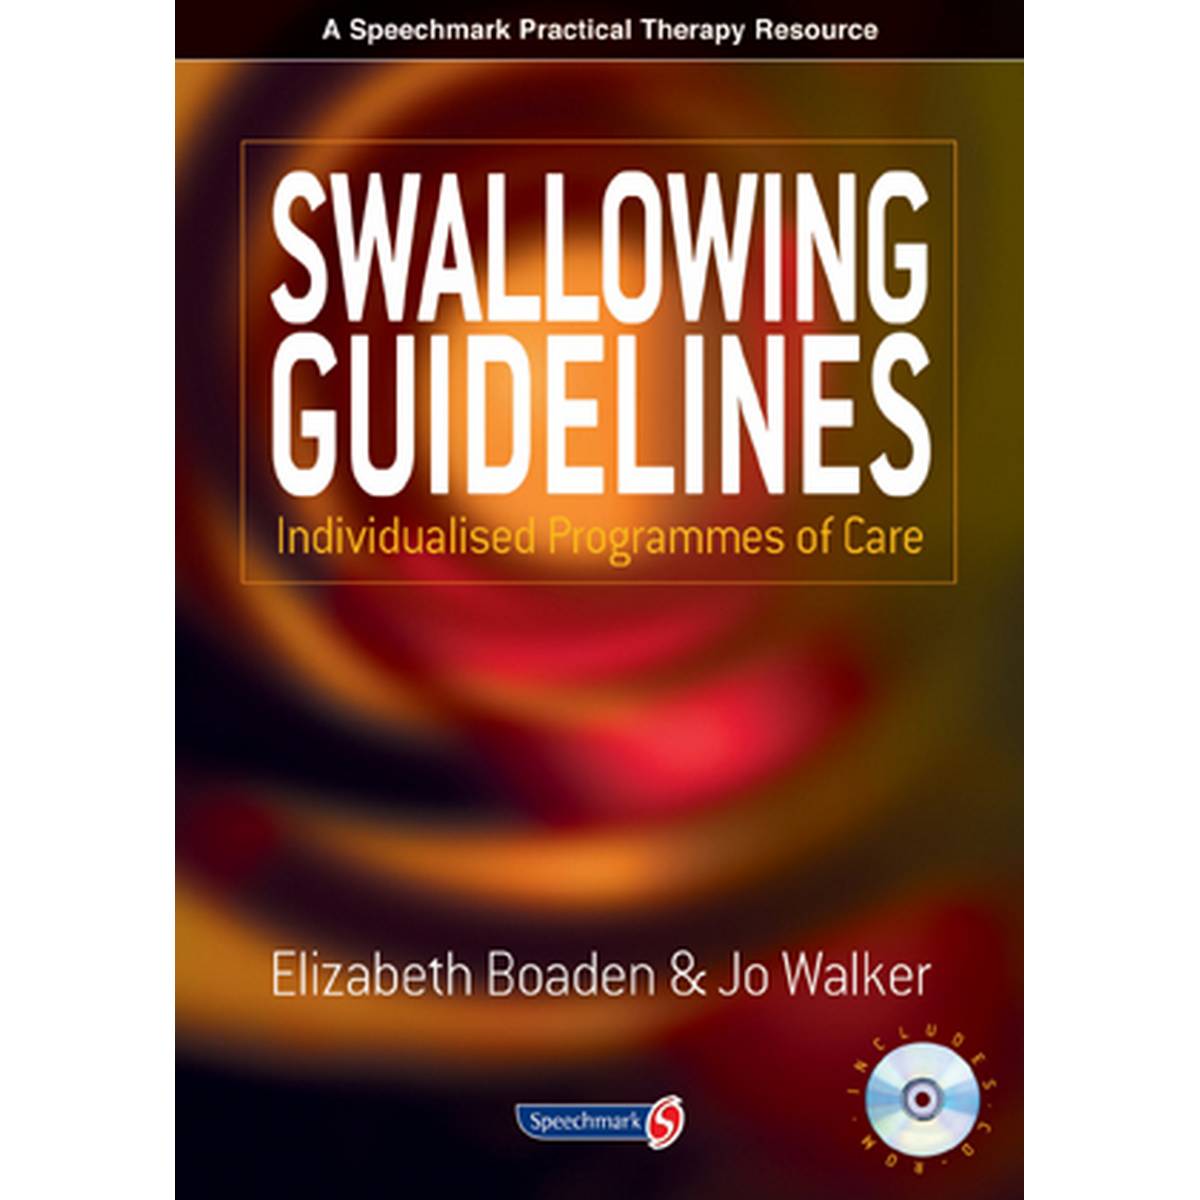 Swallowing Guidelines